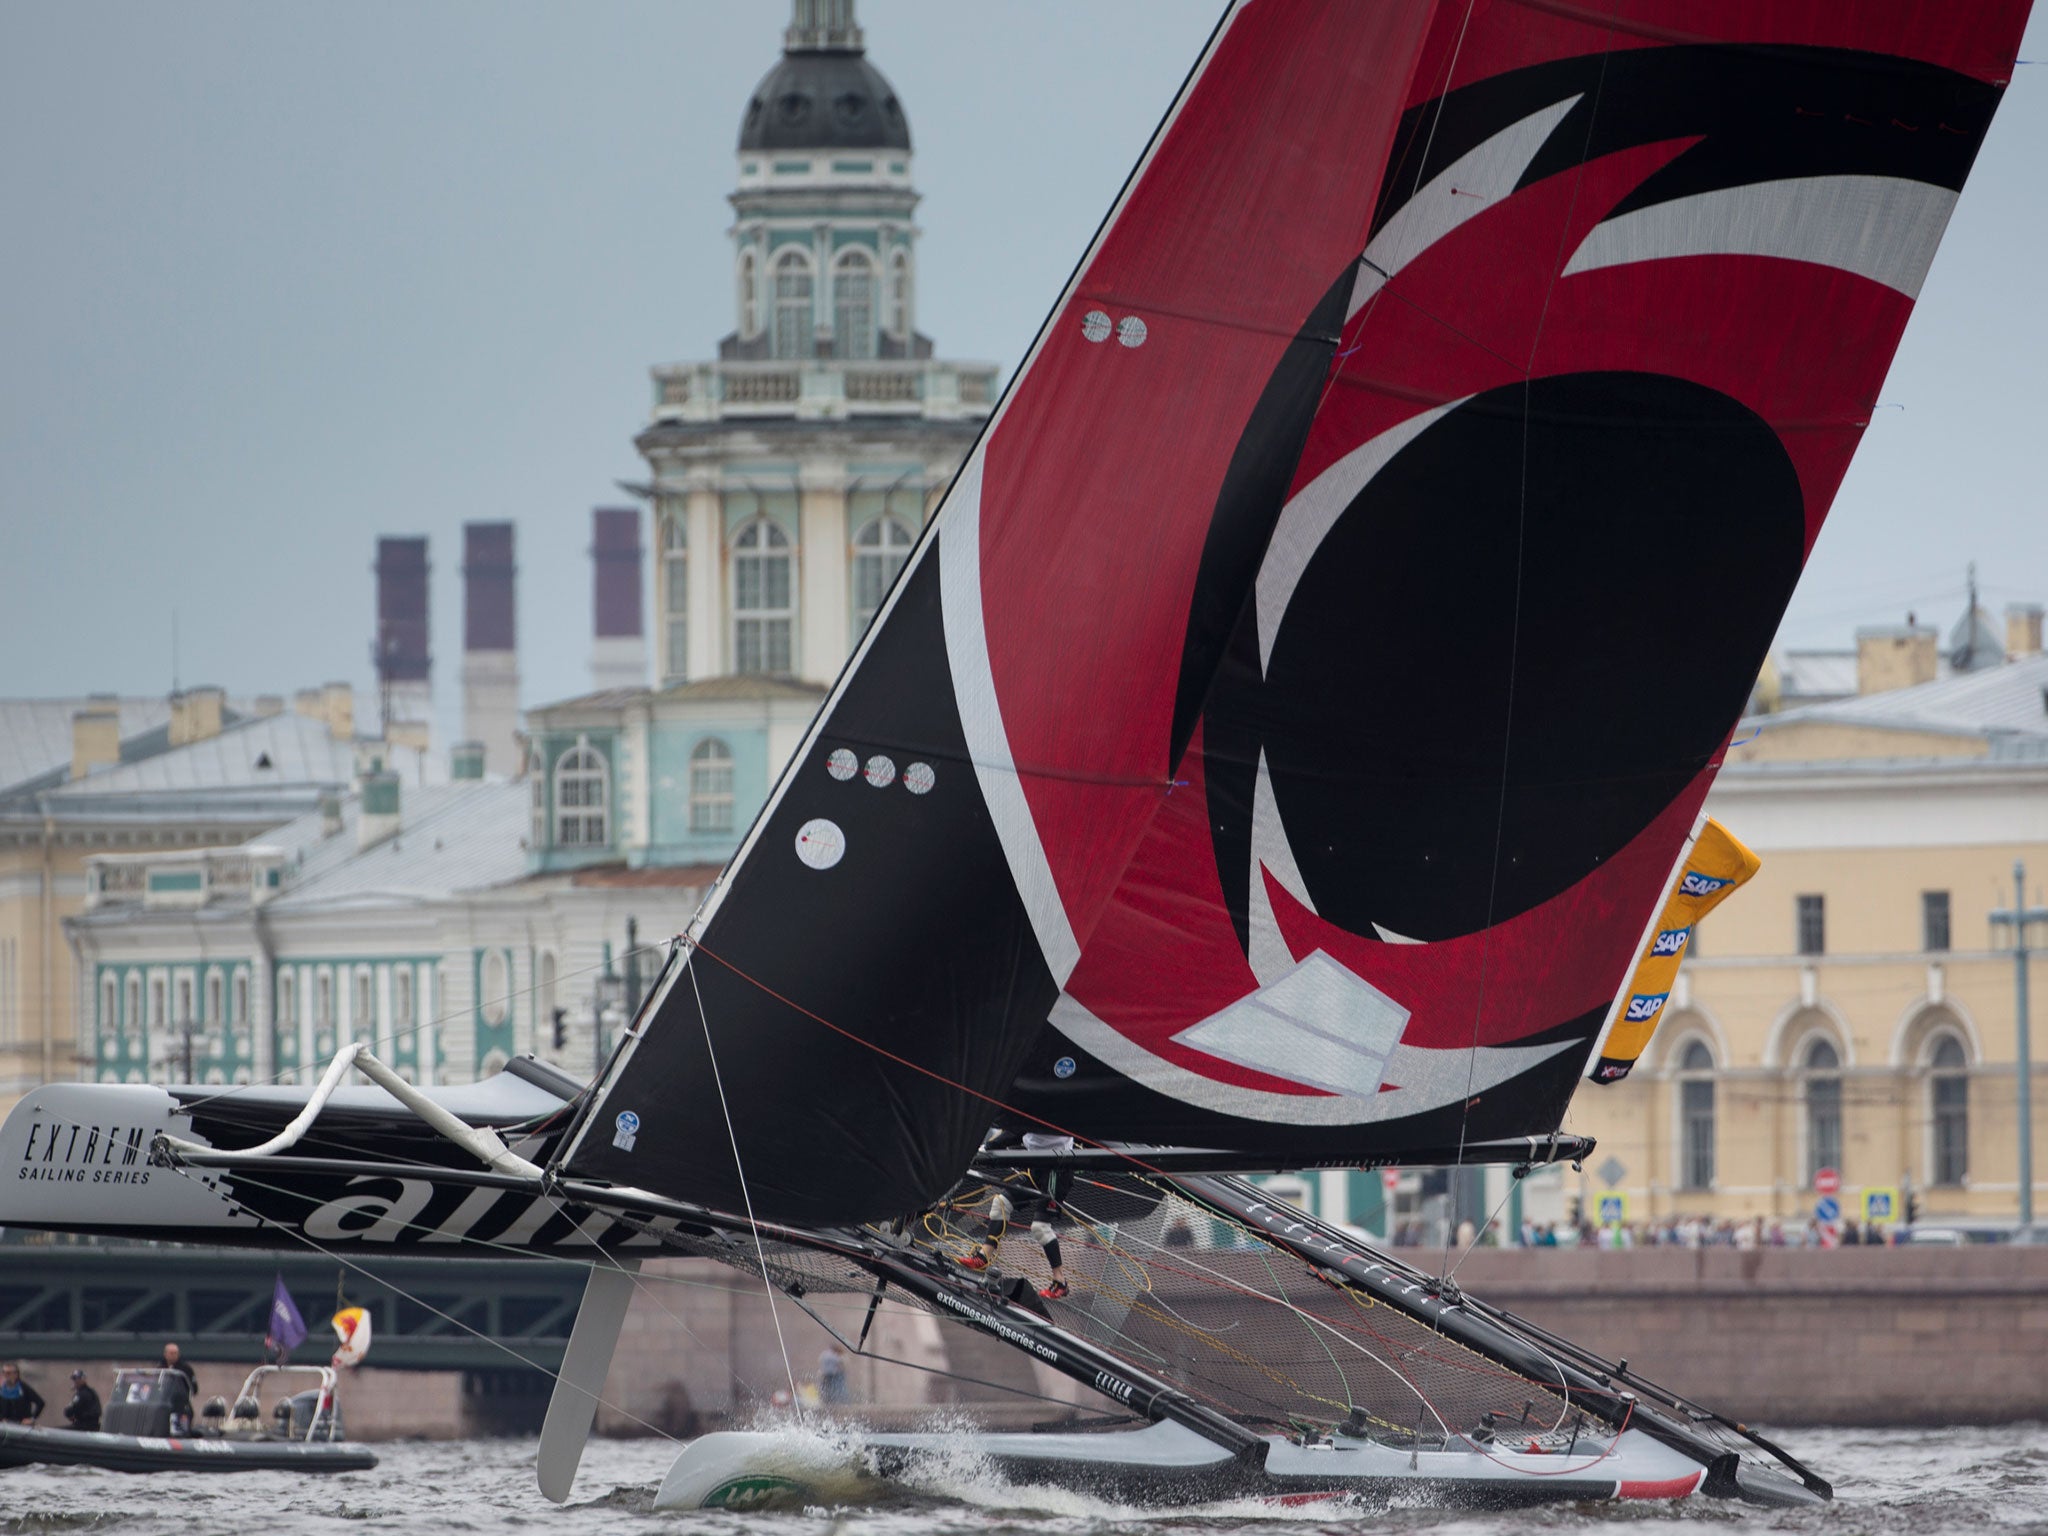 There was plenty of spectacle in St. Petersburg as Switzerland’s Alinghi notched up another win in the Extreme Sailing Series